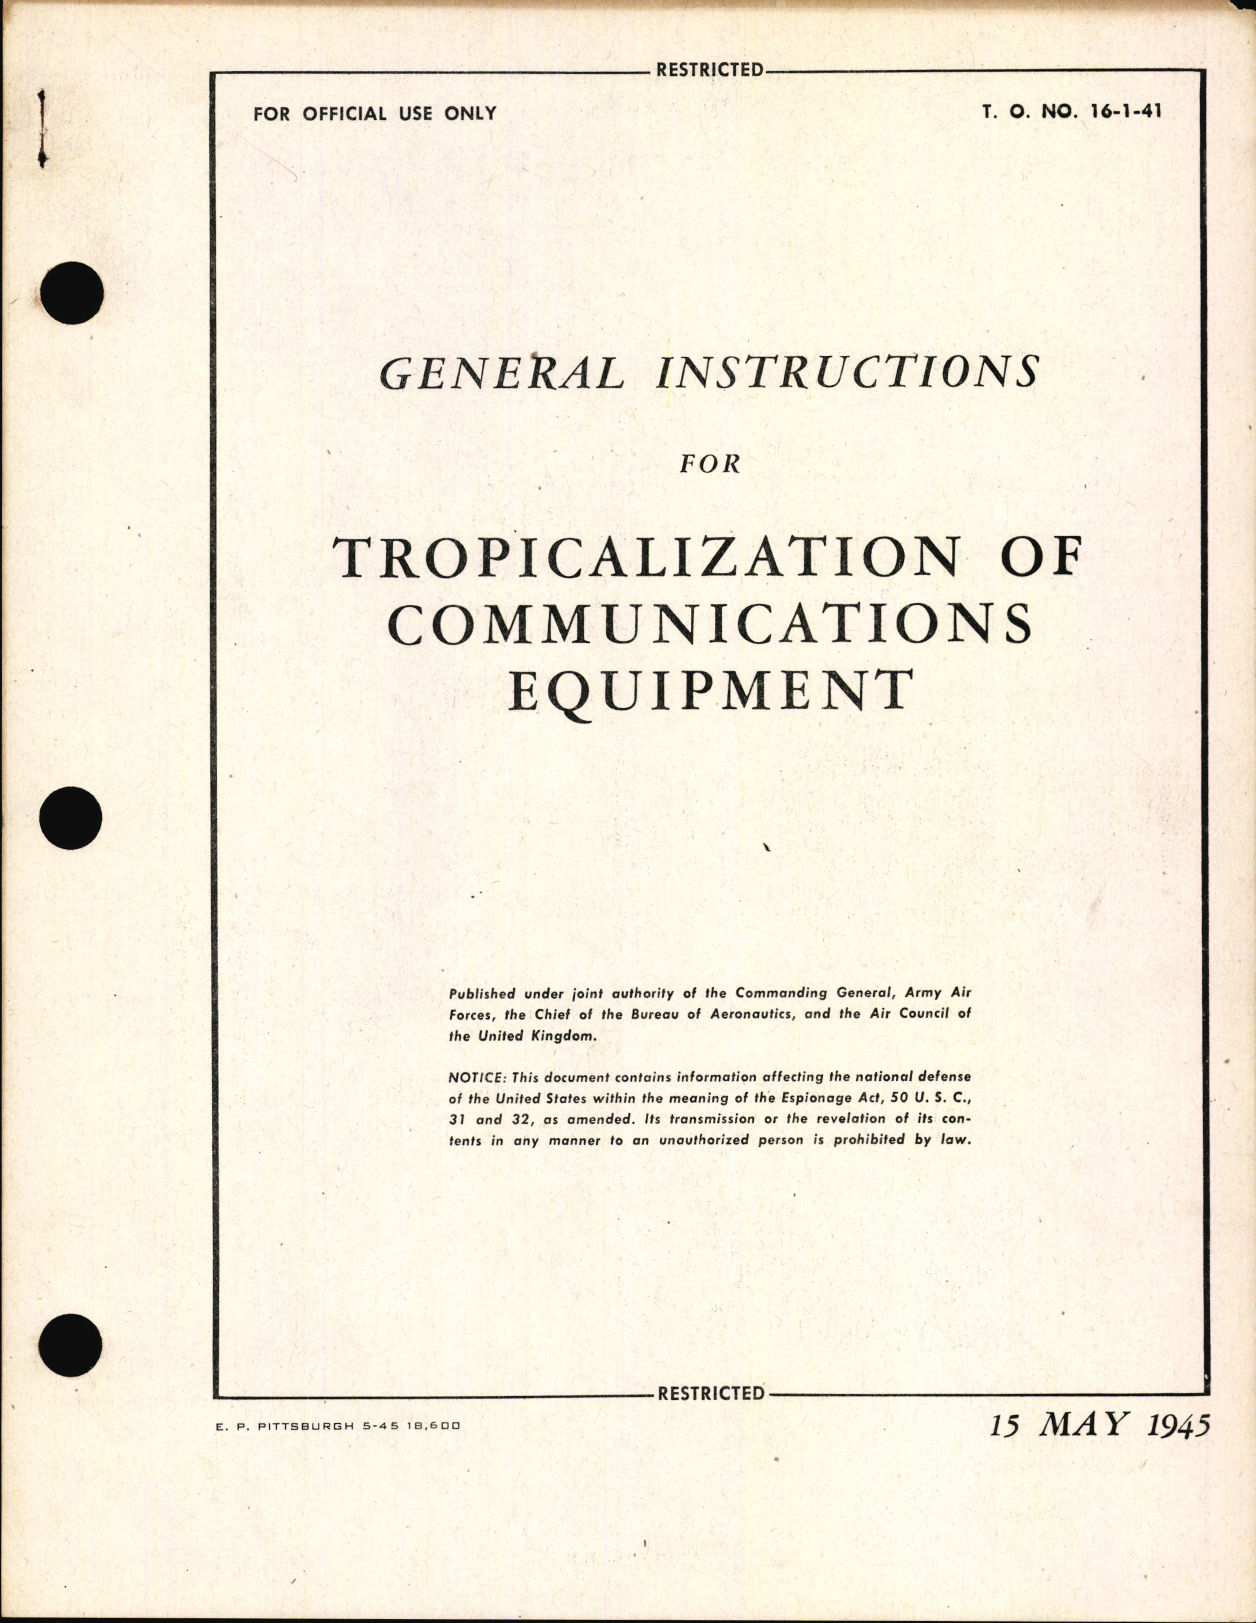 Sample page 1 from AirCorps Library document: General Instructions for Tropicalization of Communications Equipment